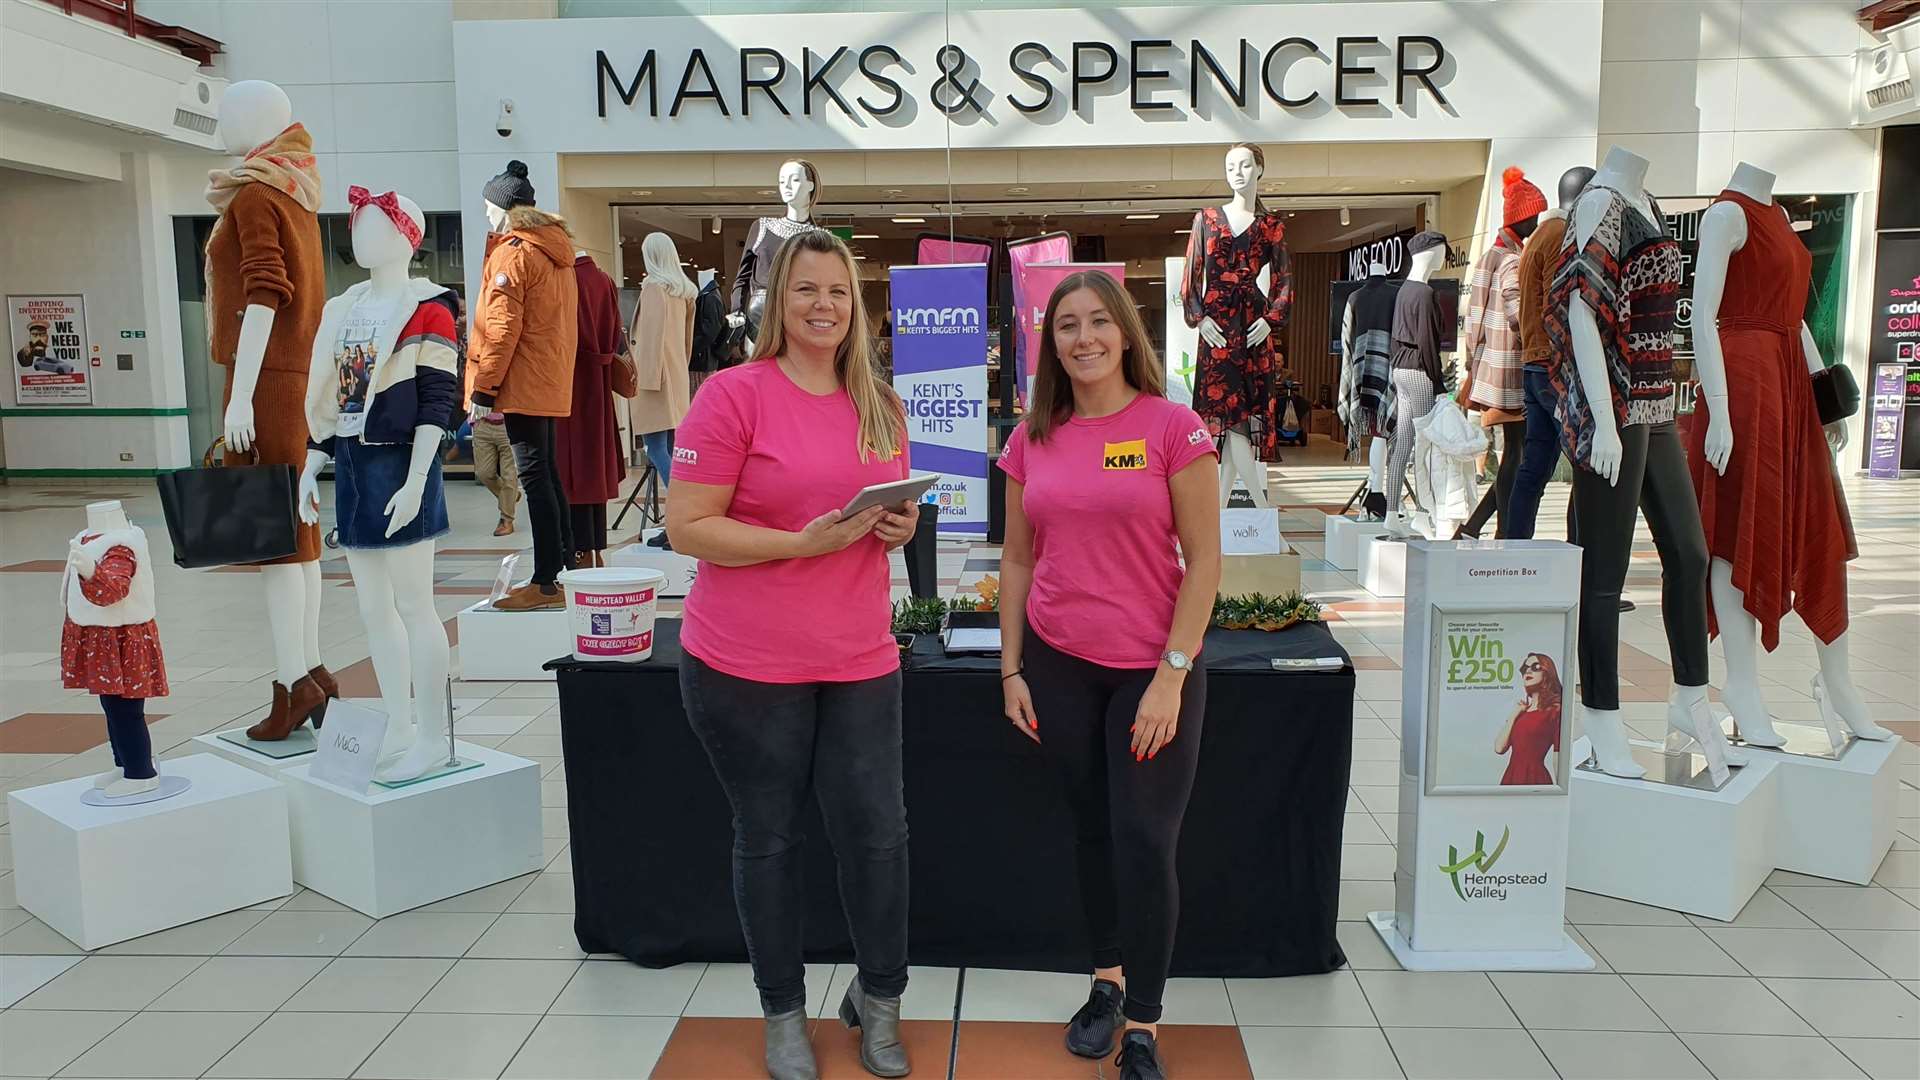 kmfm street team will be outside Marks and Spencers offering shoppers and chance to win £250 of clothing vouchers (17679710)